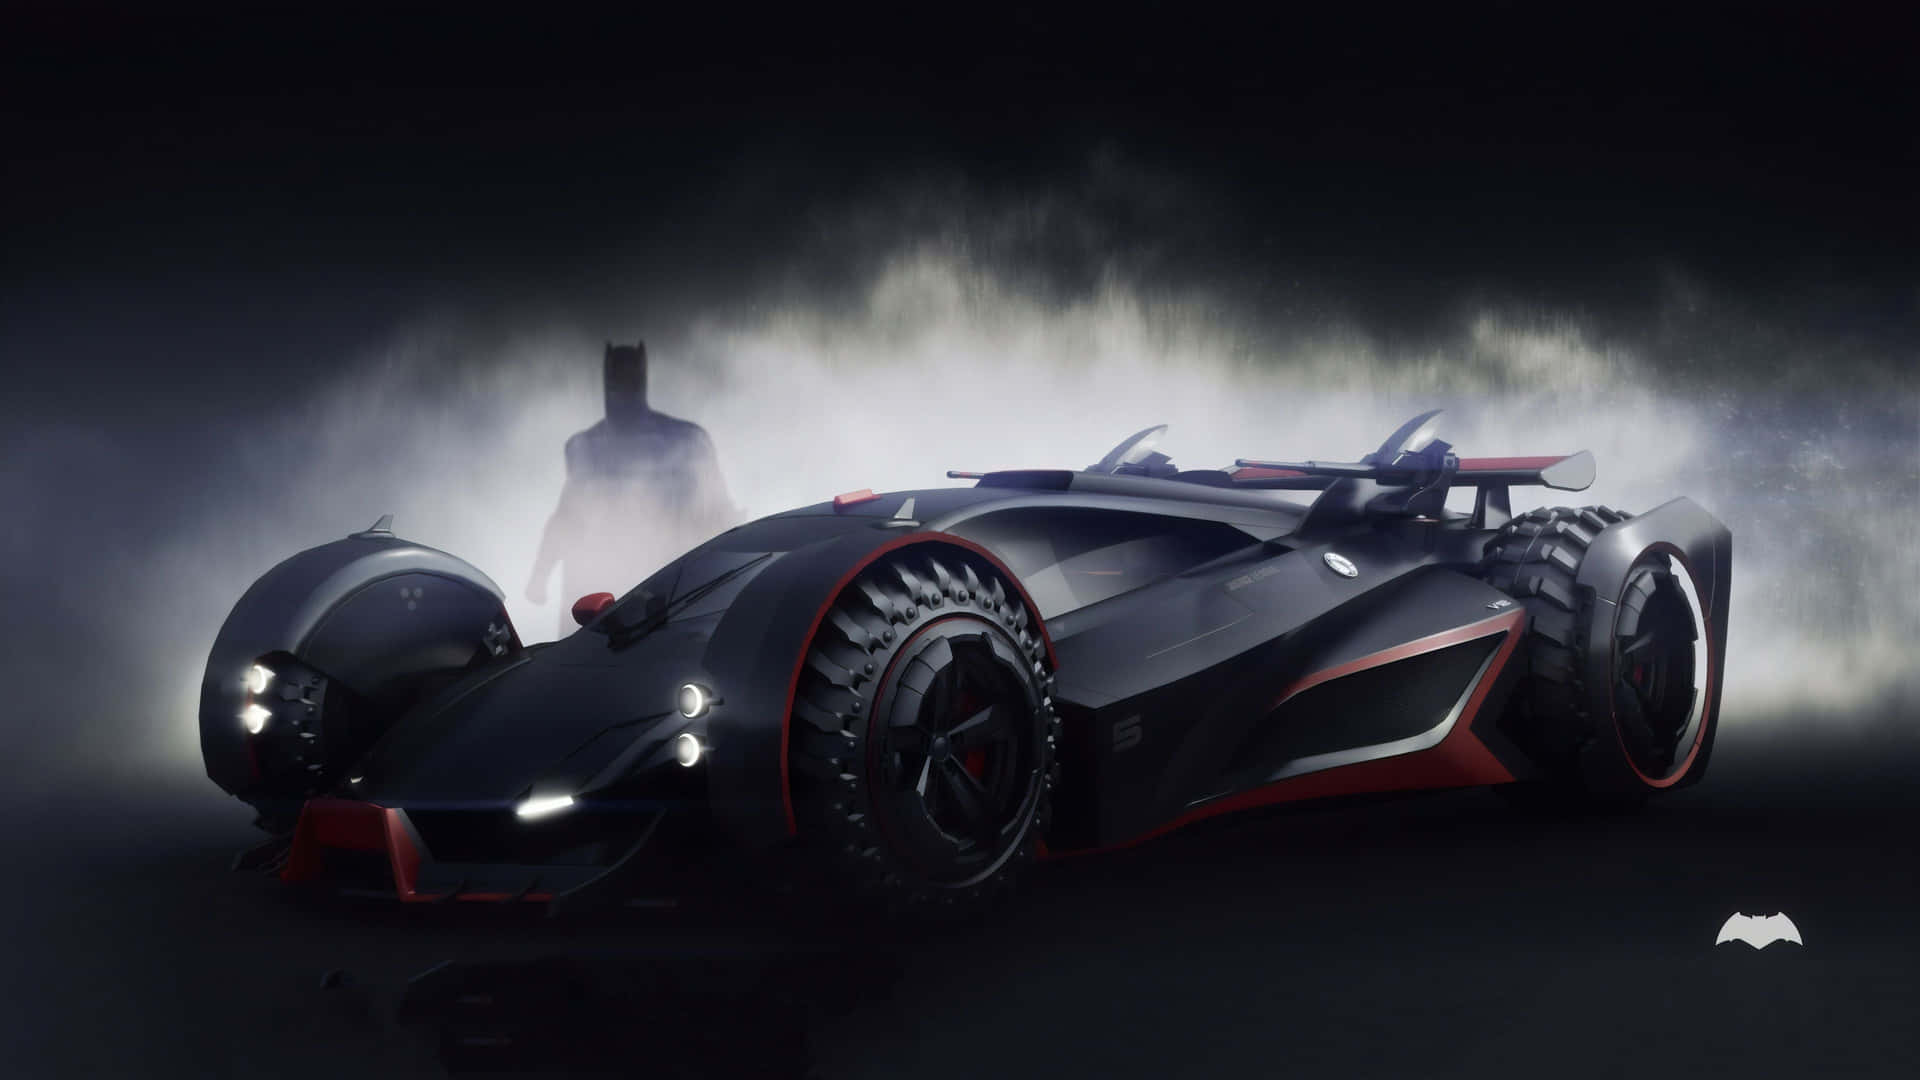 The Iconic Batmobile in All Its Glory